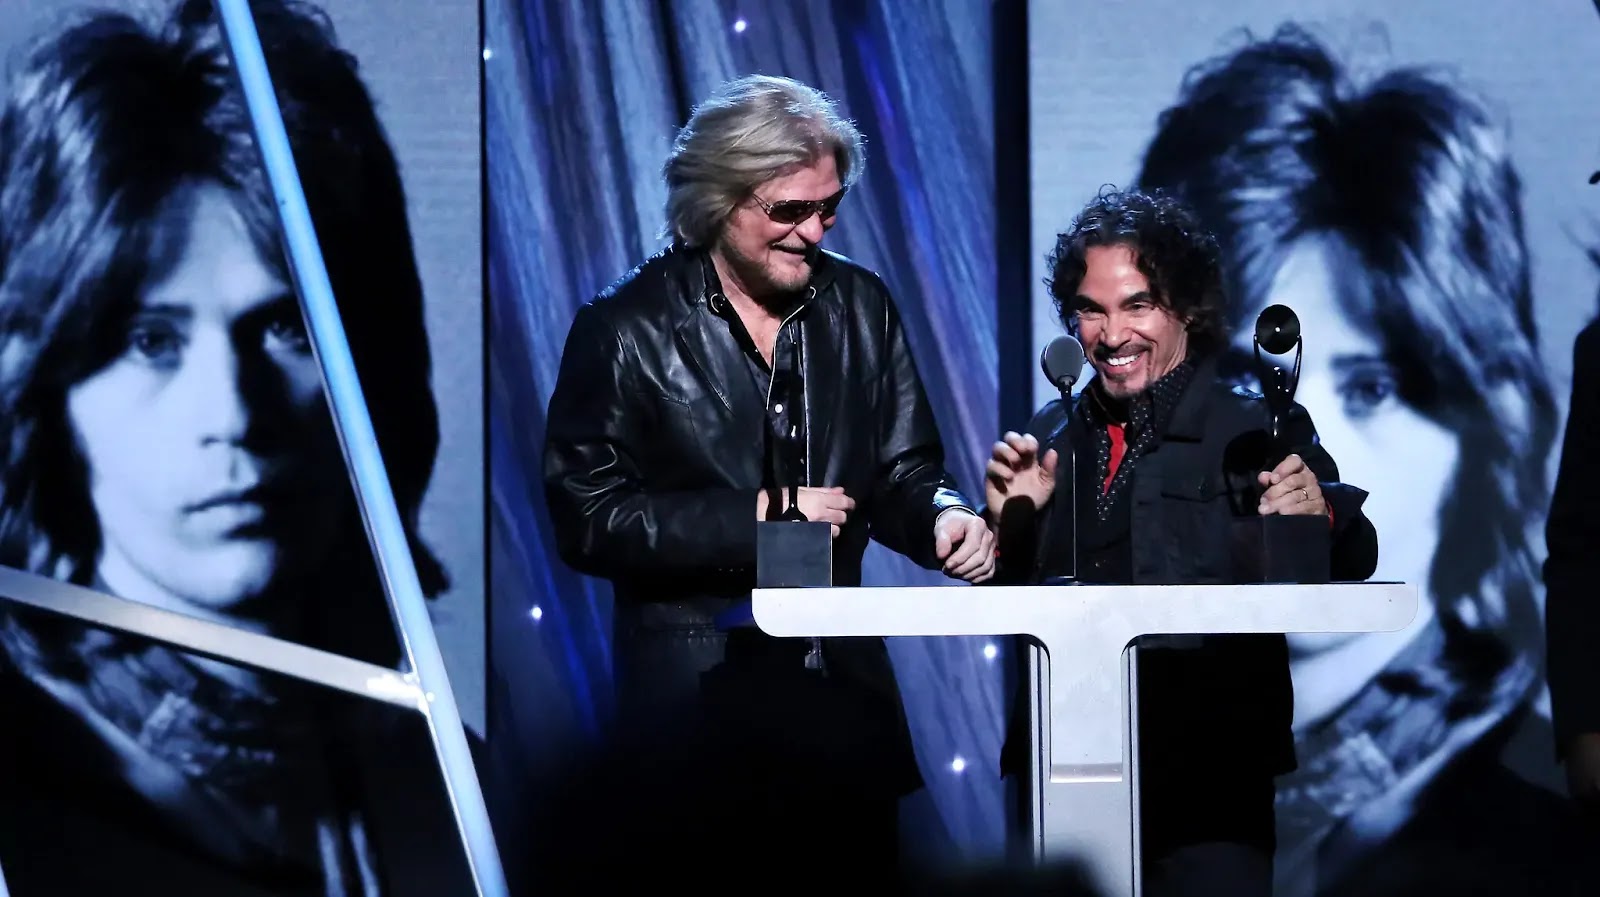 Legal Harmony Disrupted Daryl Hall Sues John Oates in Bitter Legal Battle